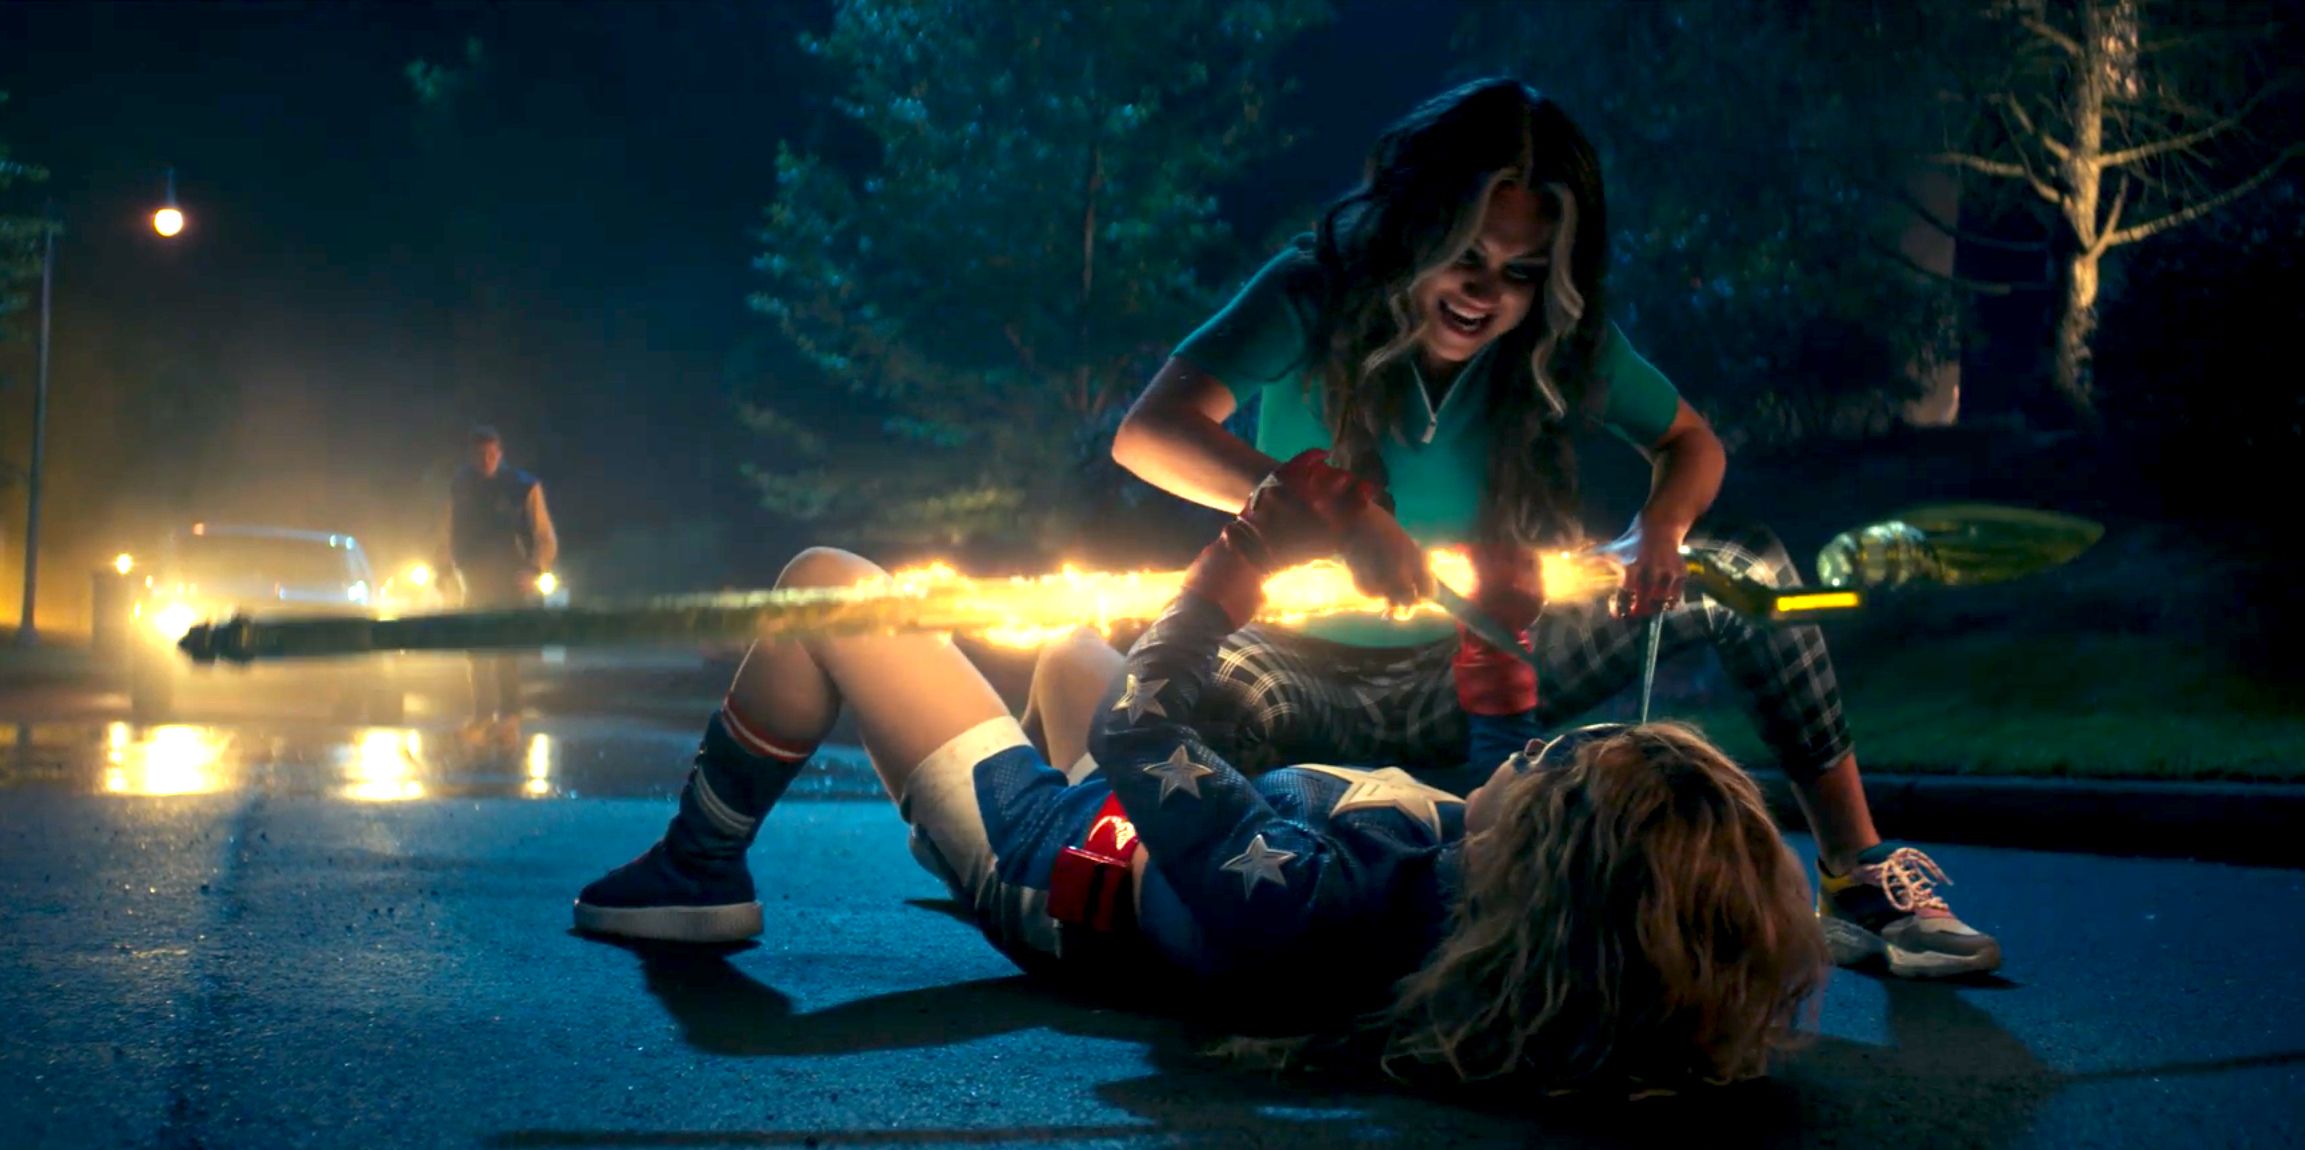 Shiv kneeling over a pinned-down Stargirl, trying to stab her.